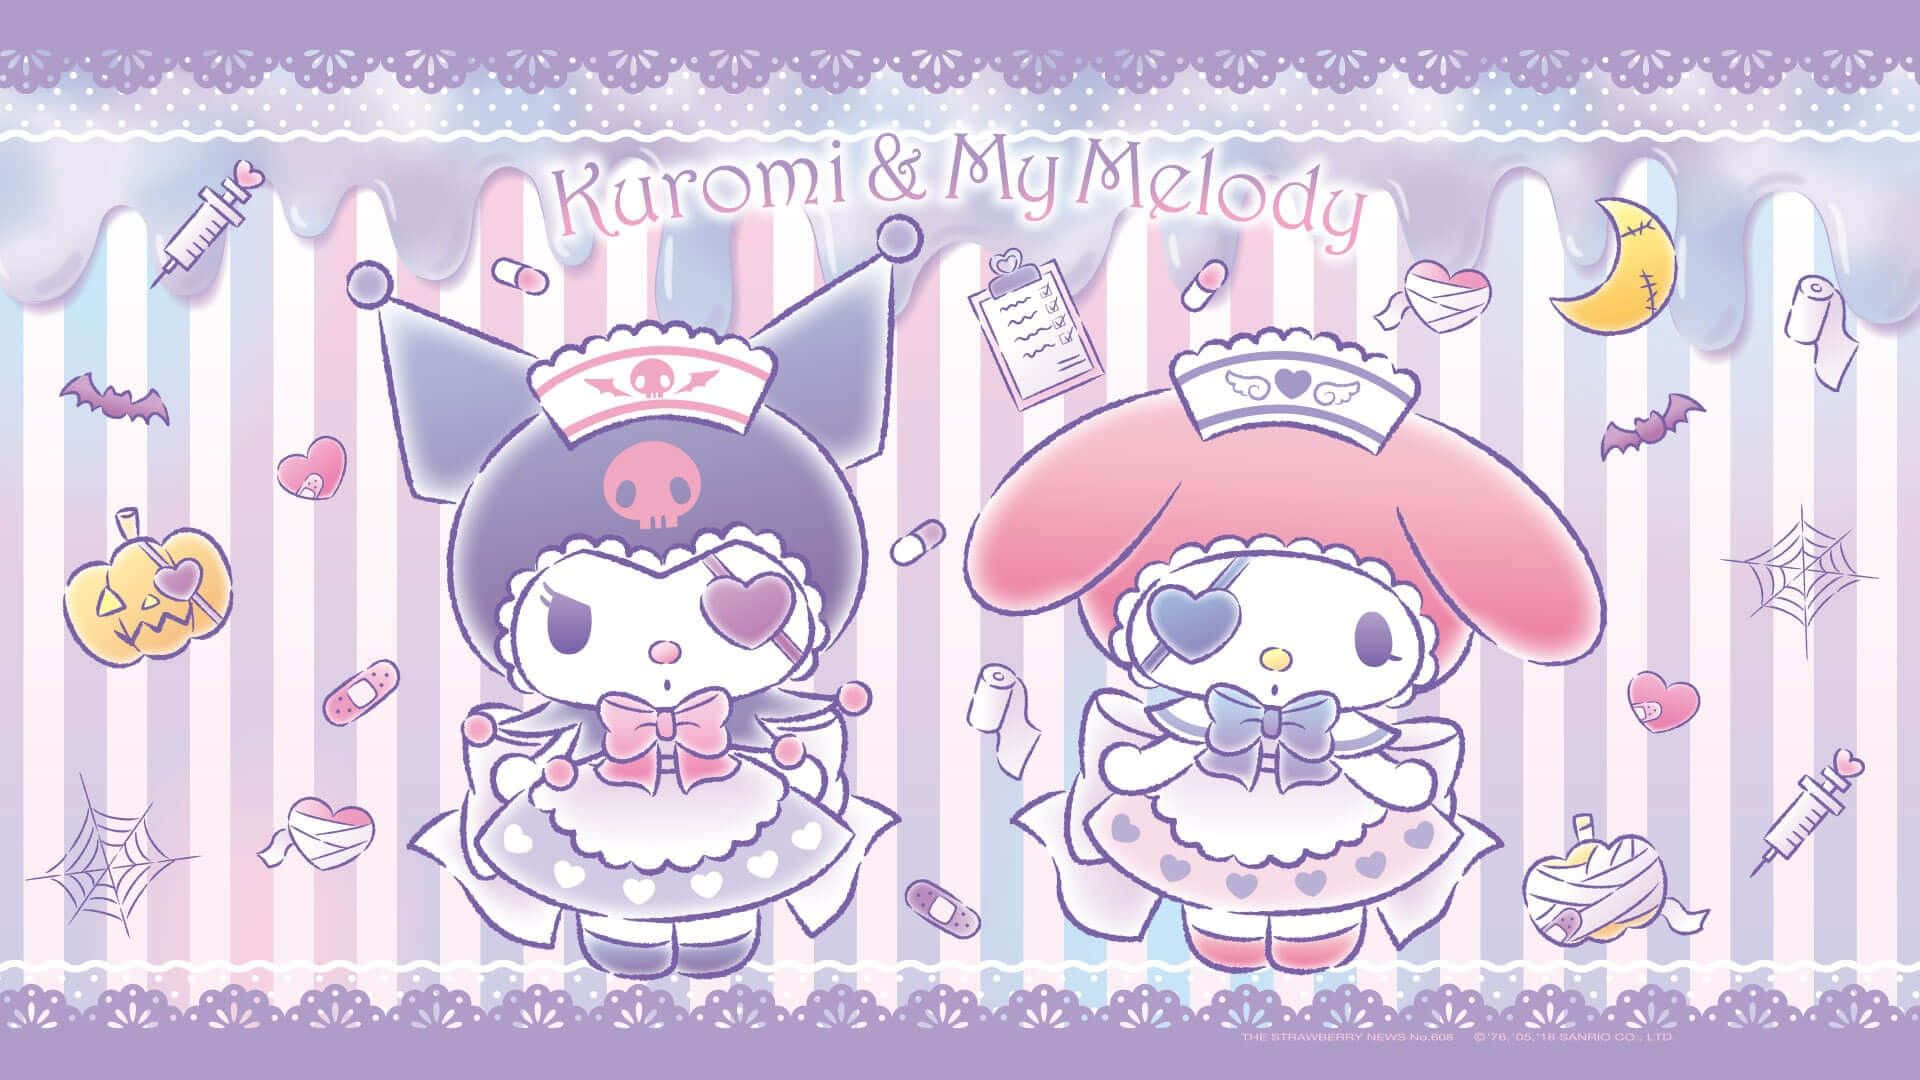 "Experience the Colourful World of My Melody with a Fun Laptop"! Wallpaper